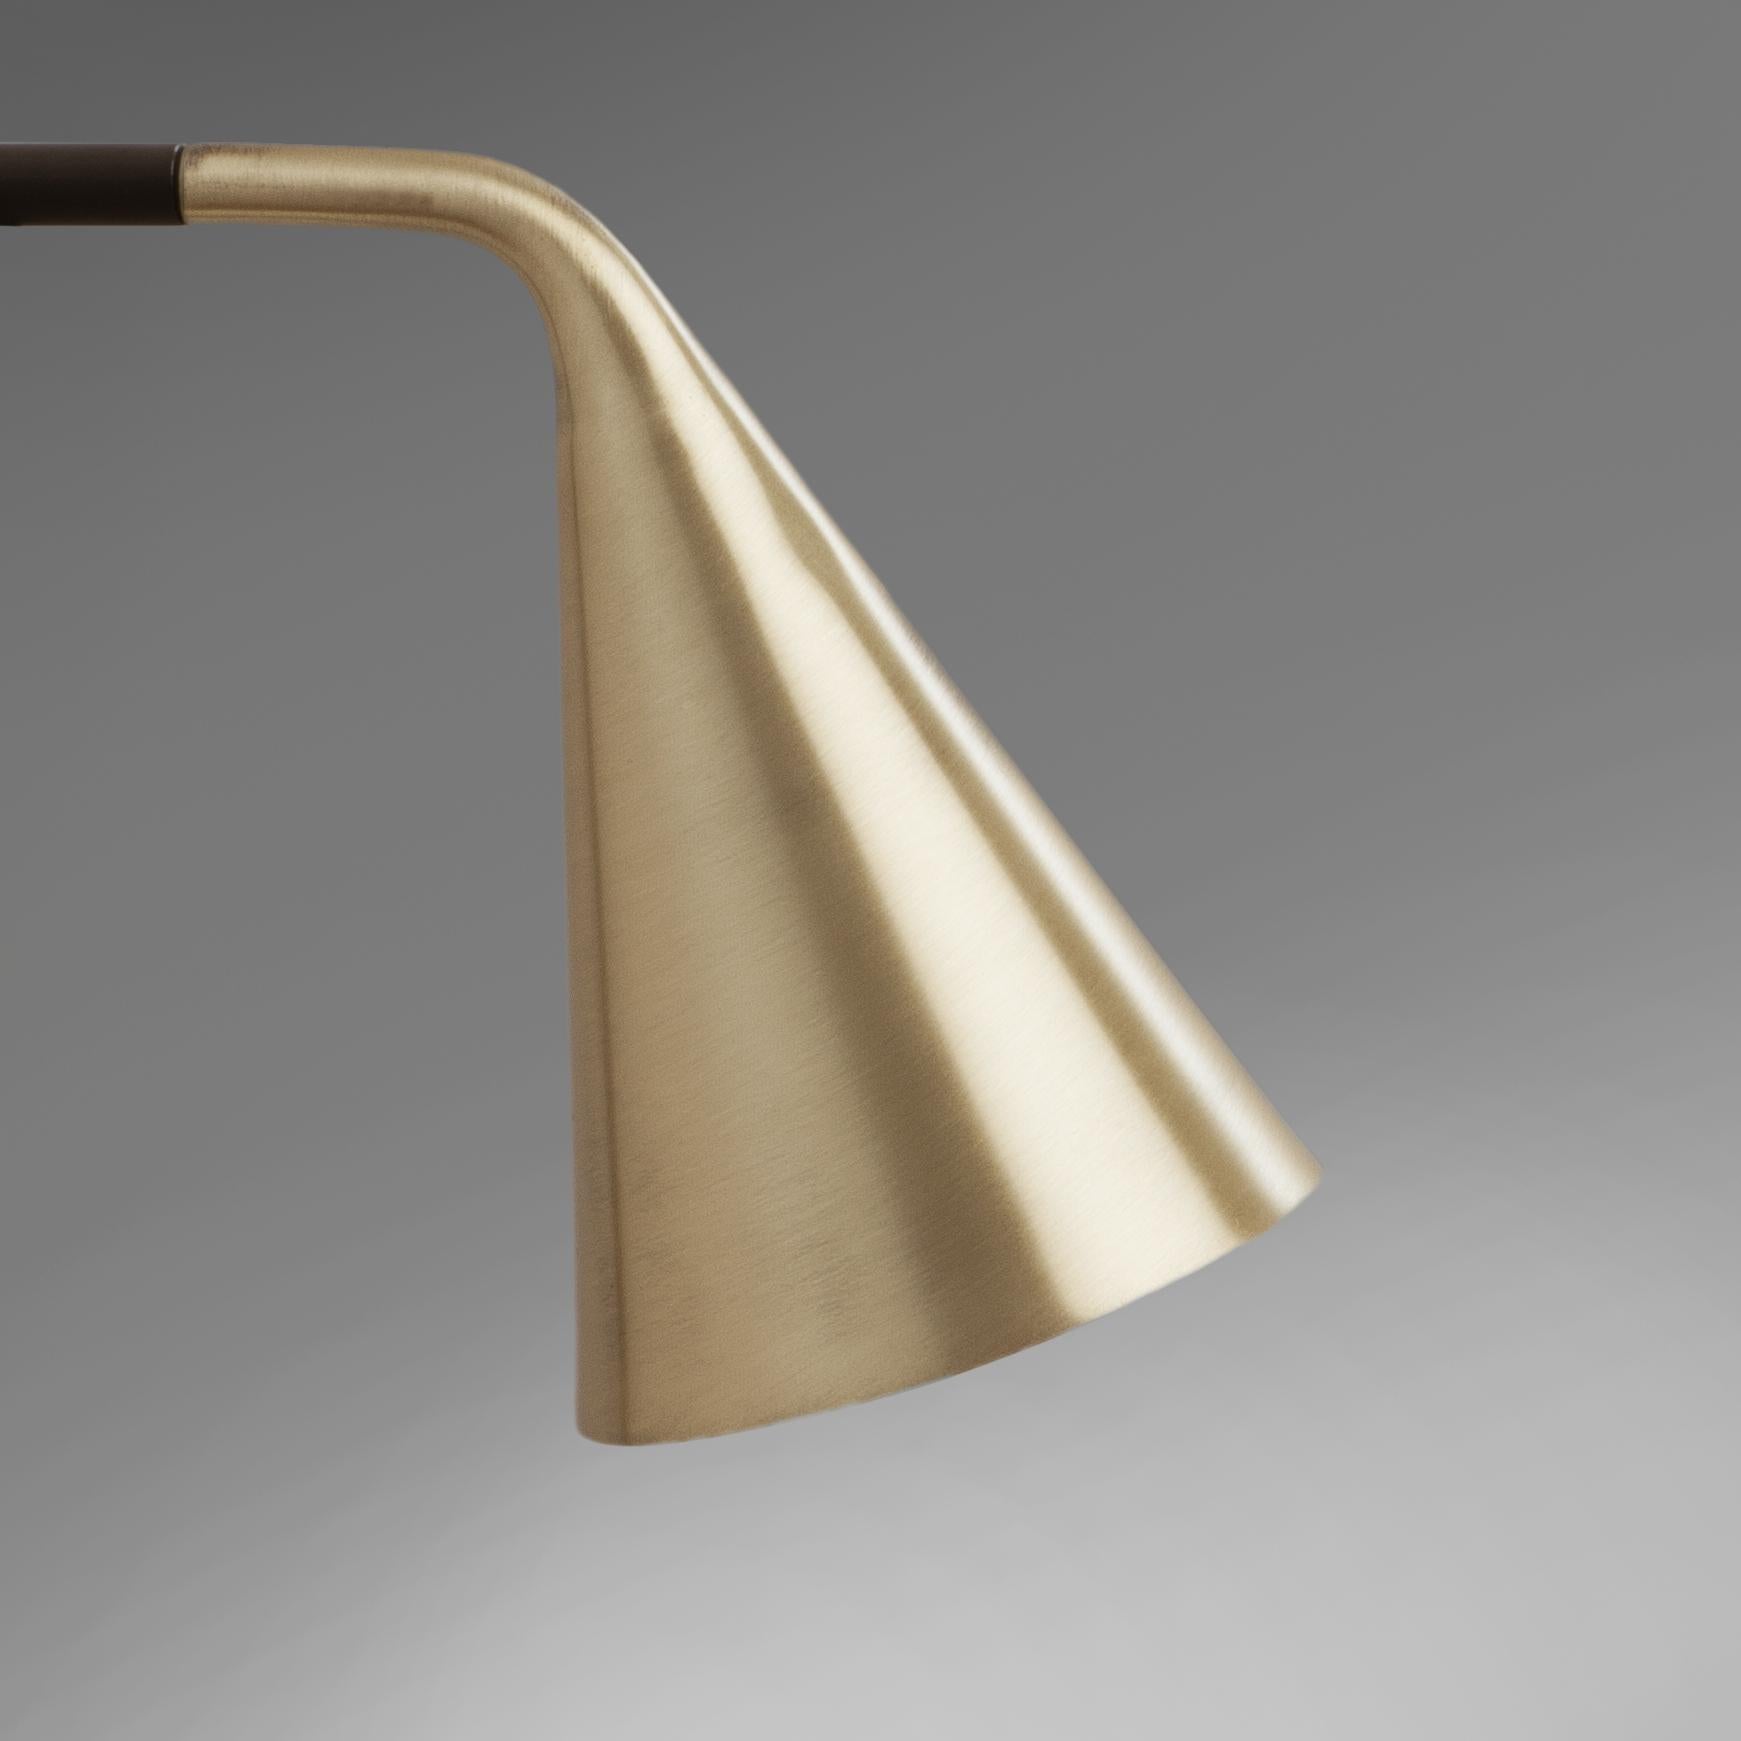 A new formal and material interpretation of the conical diffuser is the main feature of Gordon lamps. The essential and refined aspect with a strong character that is conferred by the shape of the brass casting; these practical and versatile lamps